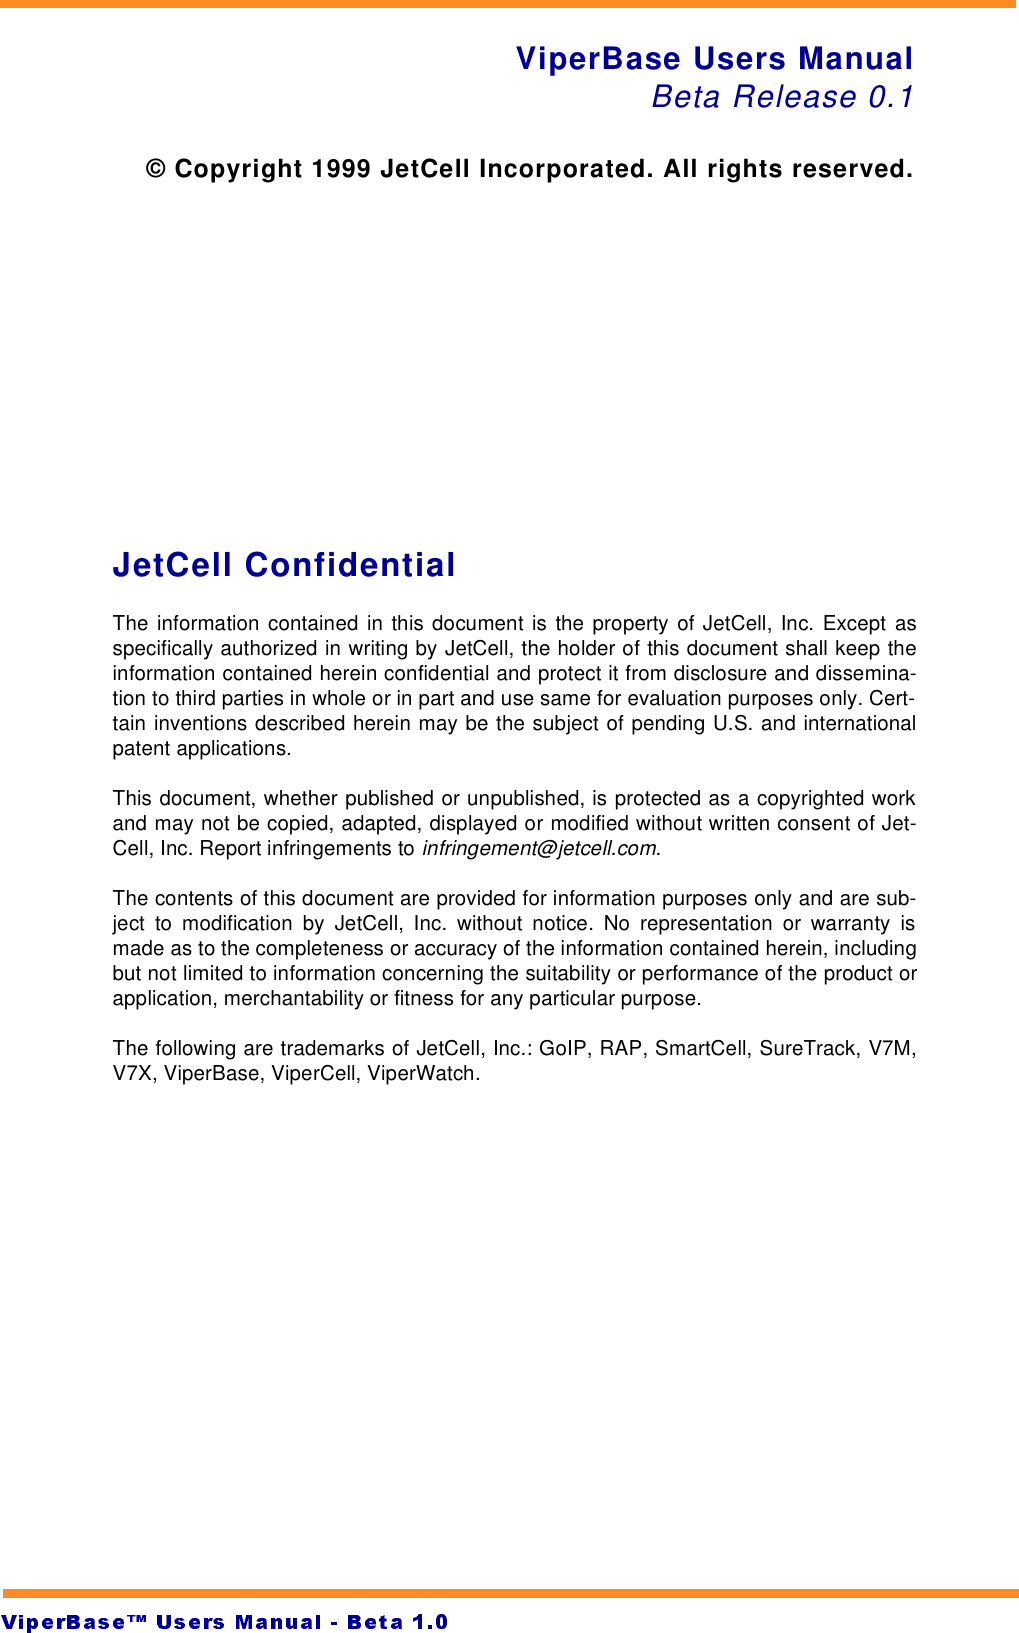 JetCell ConfidentialThe information contained in this document is the property of JetCell, Inc. Except asspecifically authorized in writing by JetCell, the holder of this document shall keep theinformation contained herein confidential and protect it from disclosure and dissemina-tion to third parties in whole or in part and use same for evaluation purposes only. Cert-tain inventions described herein may be the subject of pending U.S. and internationalpatent applications.This document, whether published or unpublished, is protected as a copyrighted workand may not be copied, adapted, displayed or modified without written consent of Jet-Cell, Inc. Report infringements to infringement@jetcell.com.The contents of this document are provided for information purposes only and are sub-ject to modification by JetCell, Inc. without notice. No representation or warranty ismade as to the completeness or accuracy of the information contained herein, includingbut not limited to information concerning the suitability or performance of the product orapplication, merchantability or fitness for any particular purpose.The following are trademarks of JetCell, Inc.: GoIP, RAP, SmartCell, SureTrack, V7M,V7X, ViperBase, ViperCell, ViperWatch.ViperBase Users ManualBeta Release 0.1© Copyright 1999 JetCell Incorporated. All rights reserved.